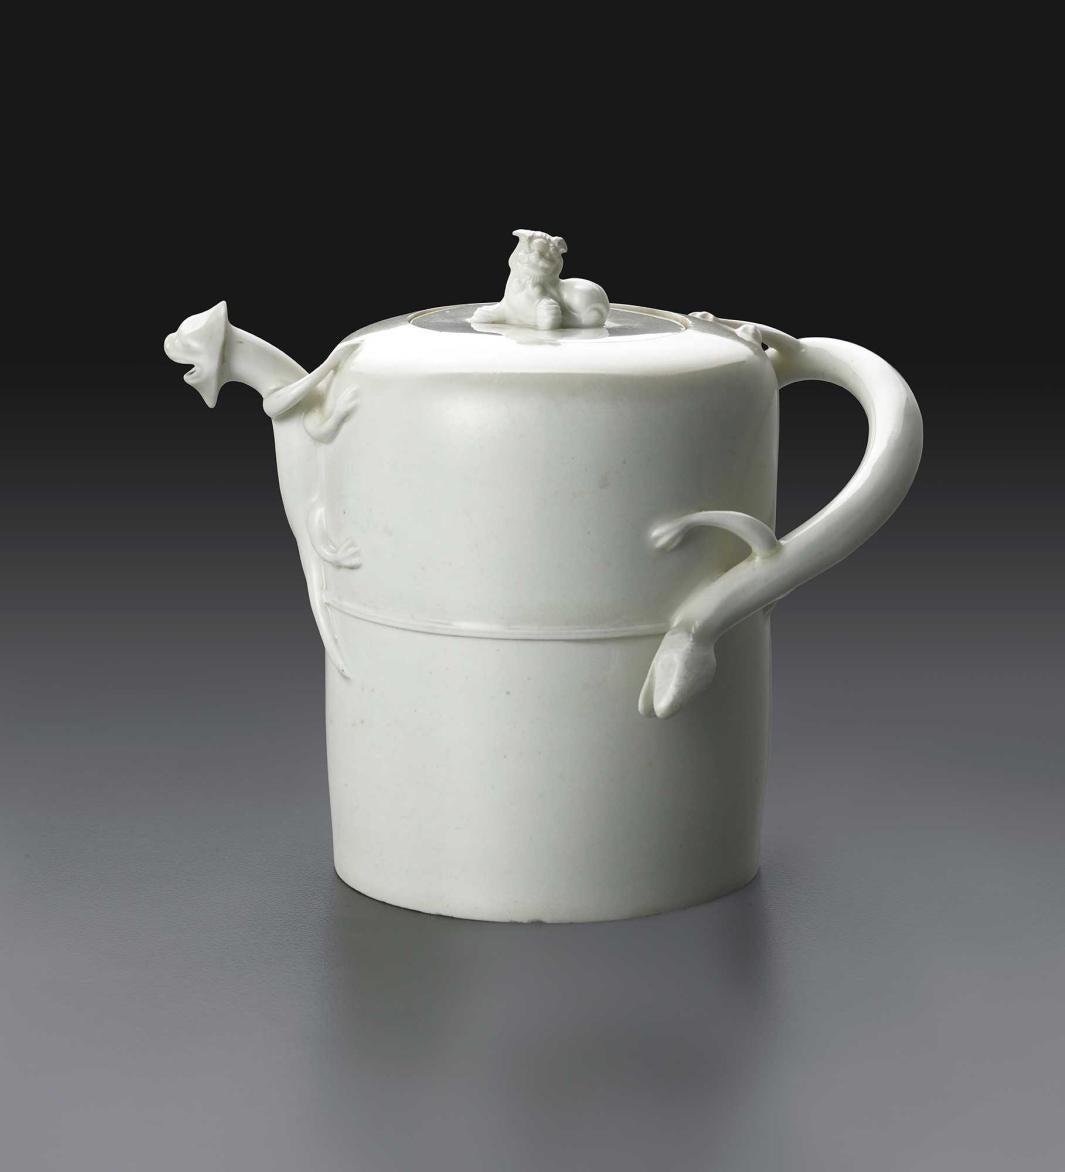 cylindrical white teapot with dragon spout